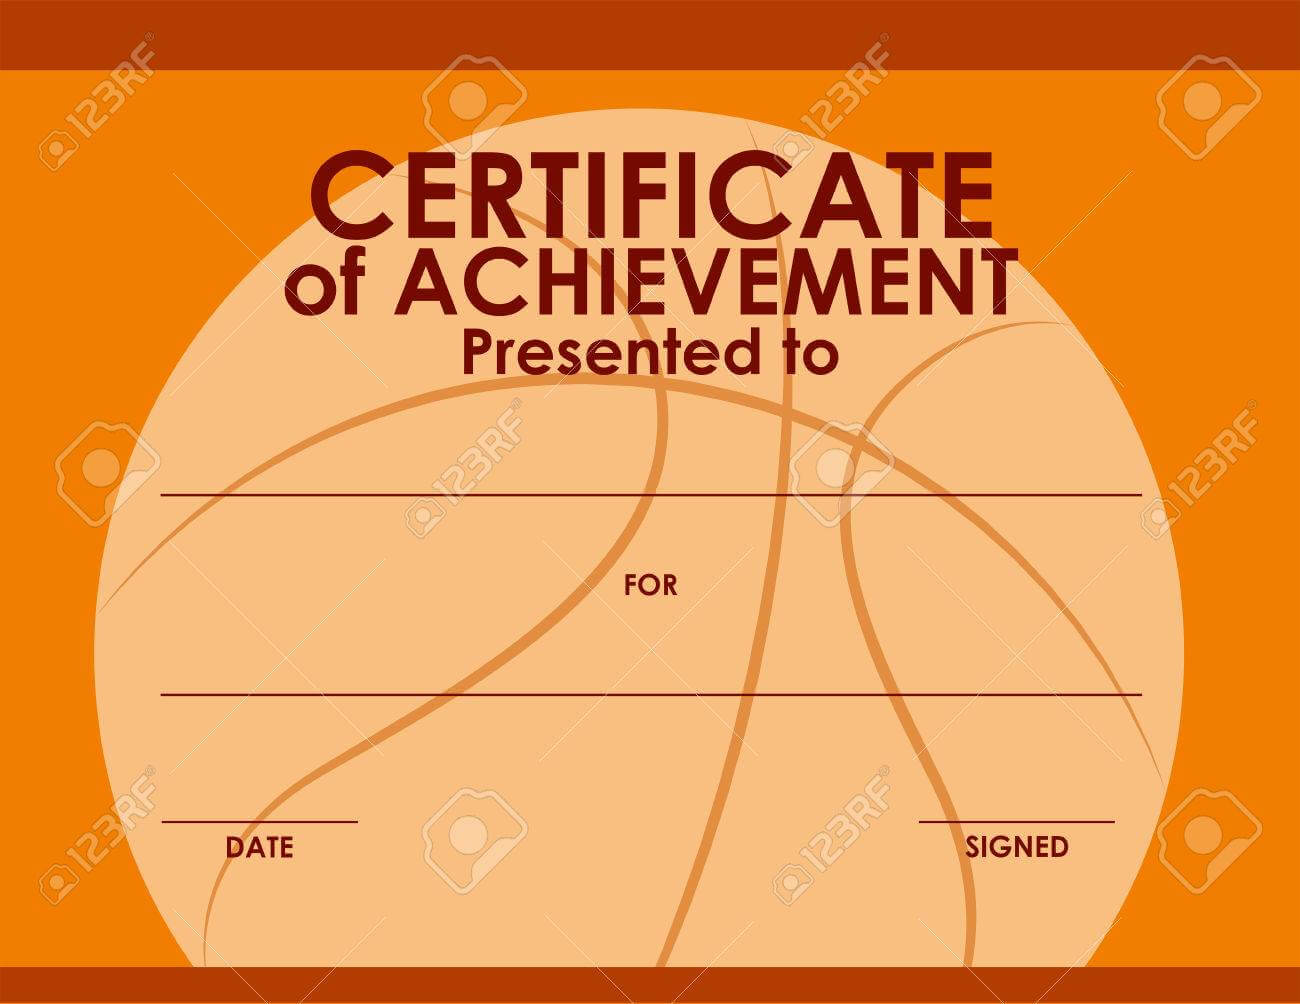 Certificate Template With Basketball Background Illustration With Basketball Certificate Template